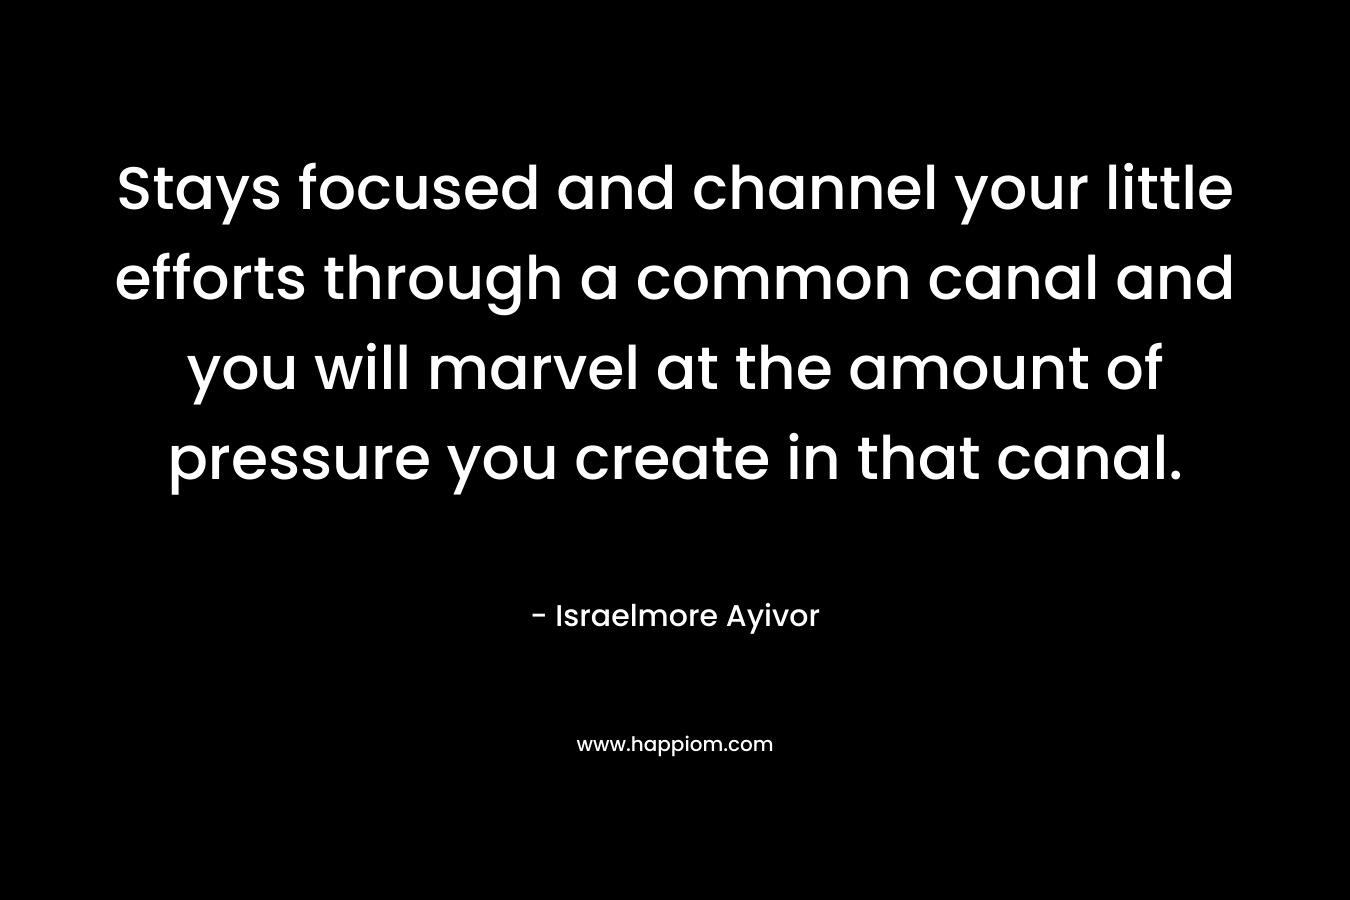 Stays focused and channel your little efforts through a common canal and you will marvel at the amount of pressure you create in that canal.